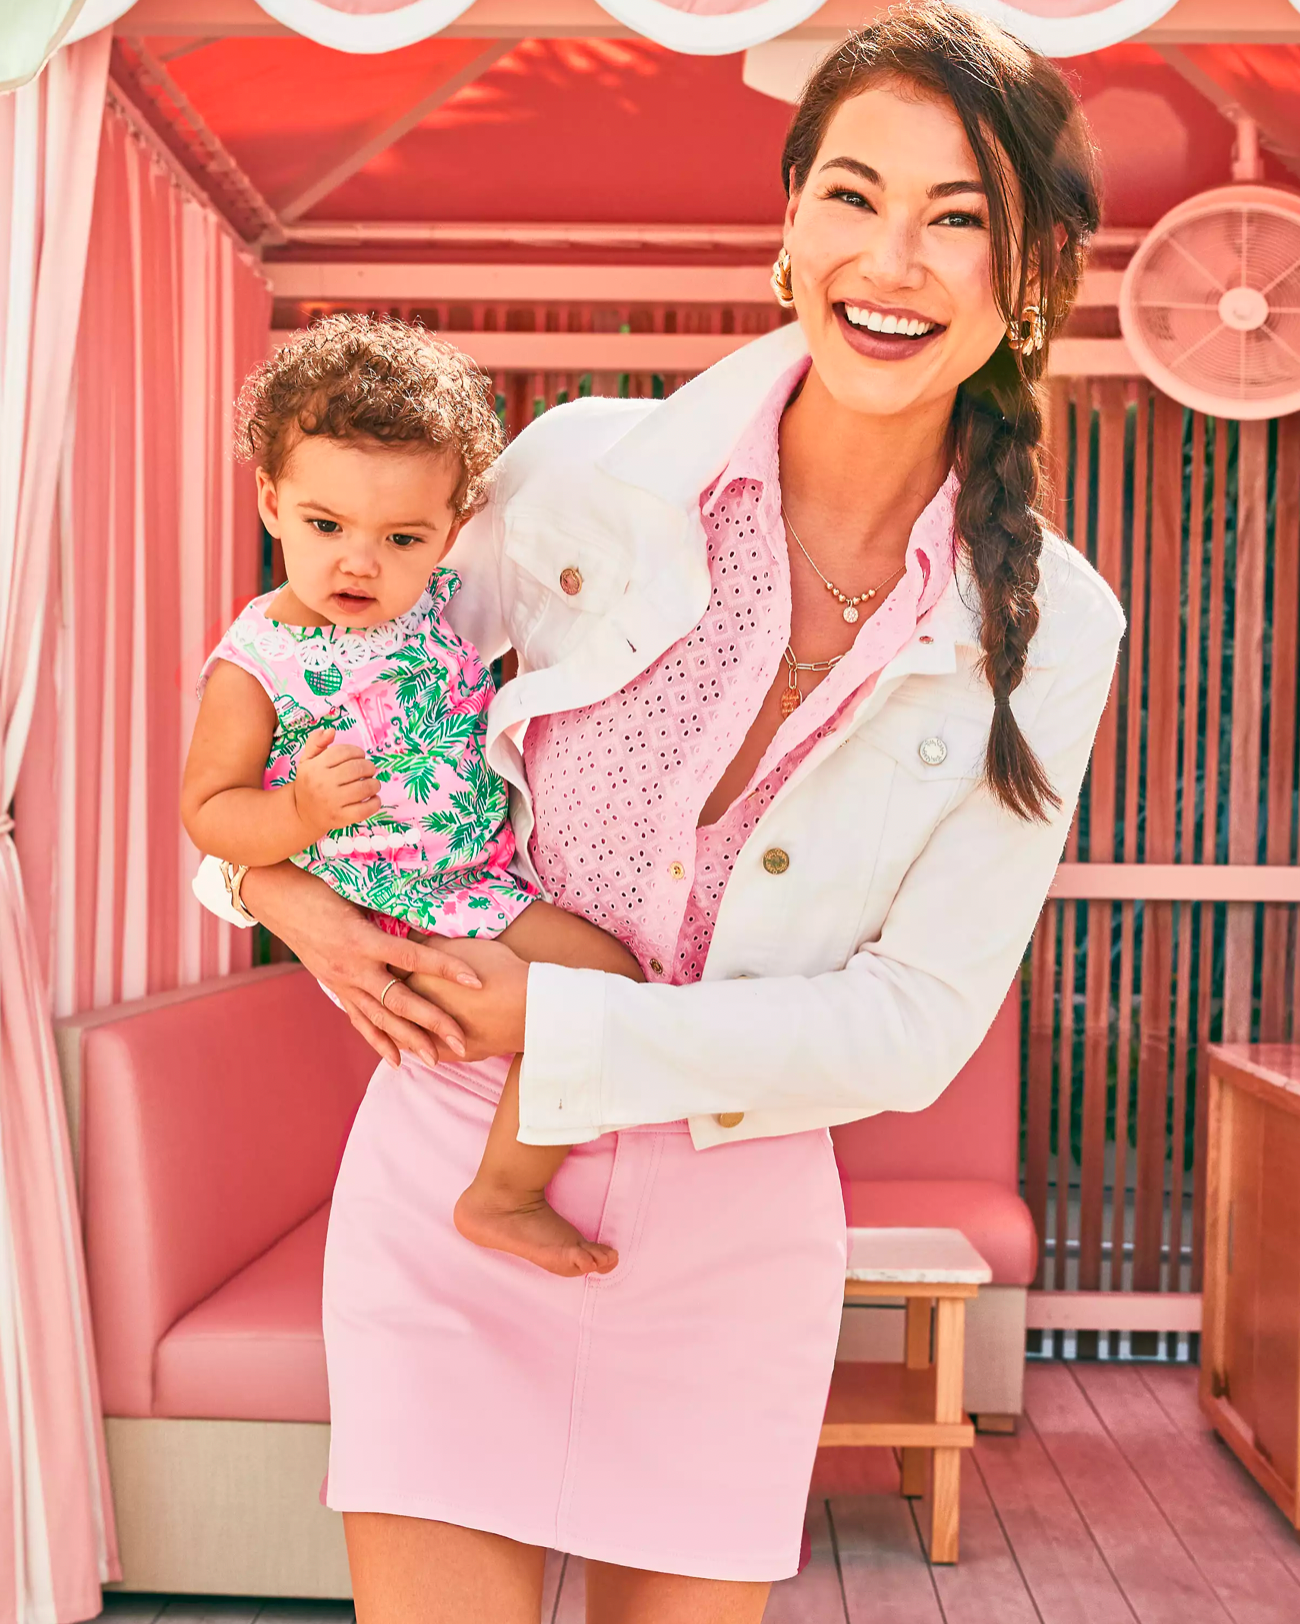 Model wearing Lilly Pulitzer Laylani Denim jacket in resort white holding a baby wearing pink skirt and pink top standing in front of a pink couch 